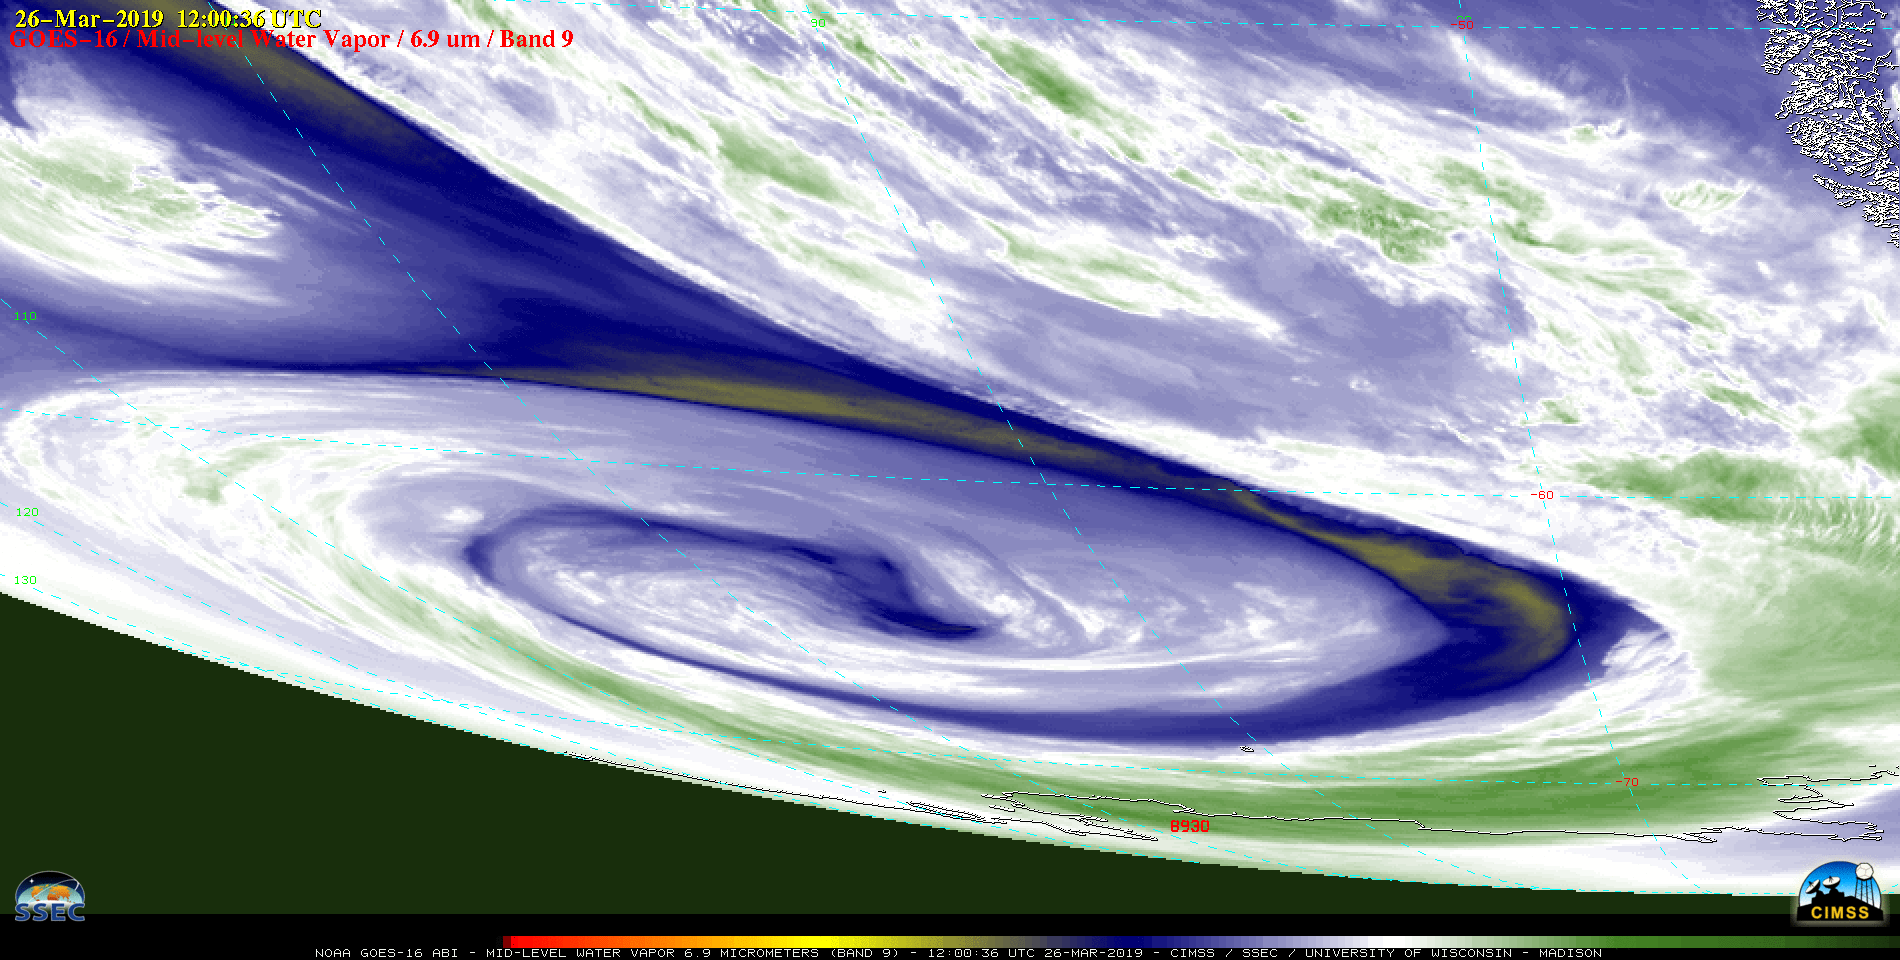 GOES-16 Mid-level Water Vapor images [click to play animation | MP4]